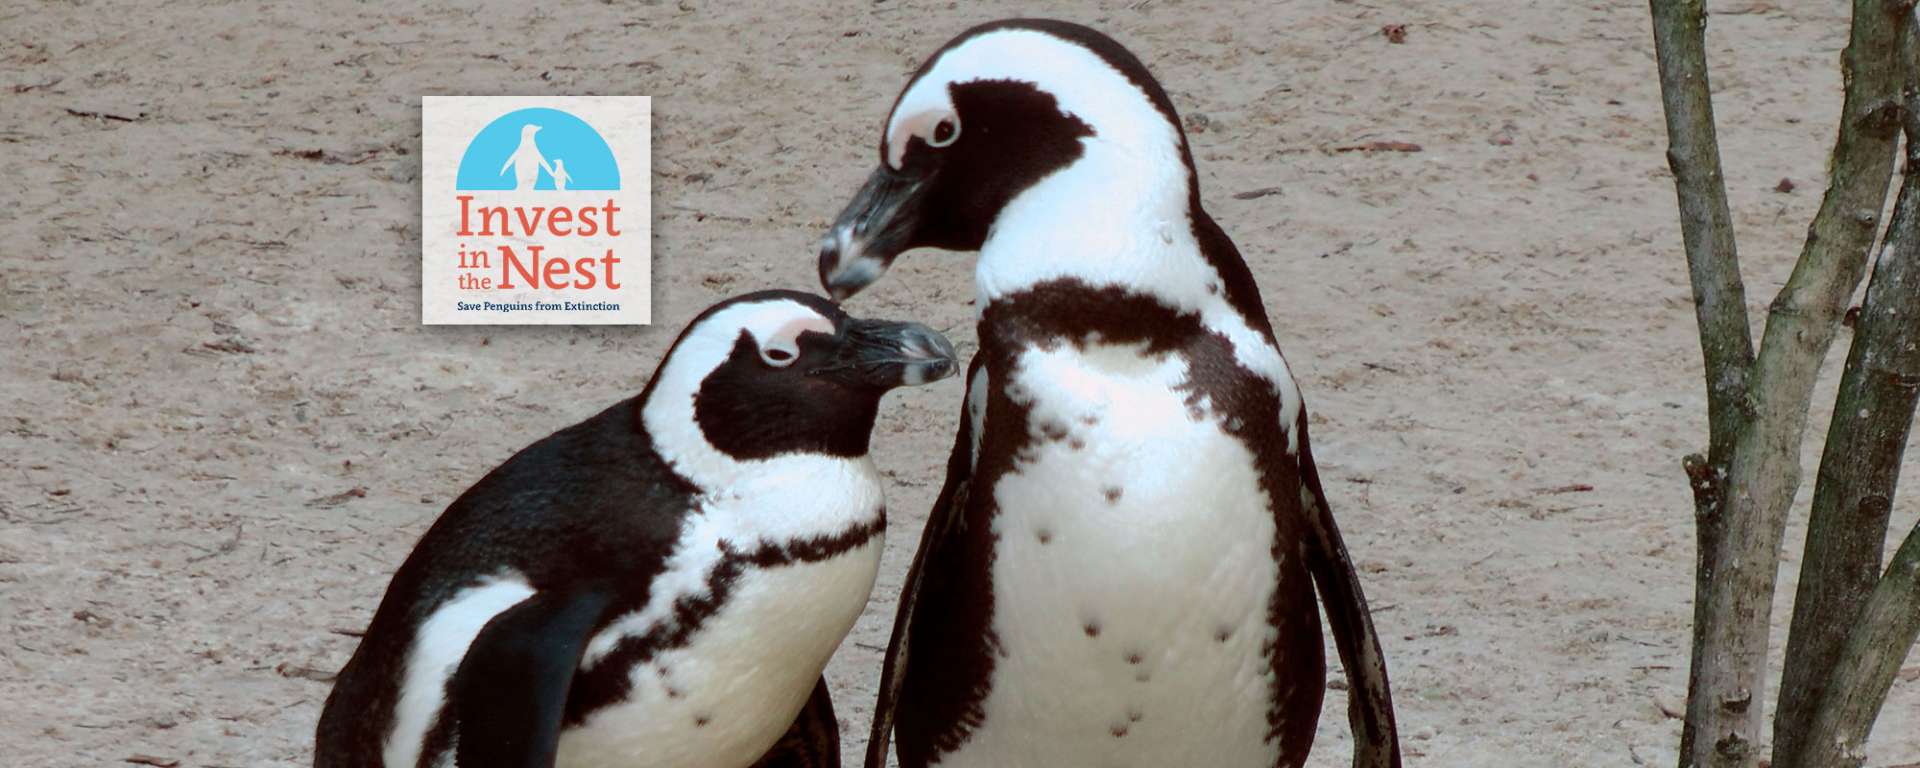 African Penguins Invest in the Nest